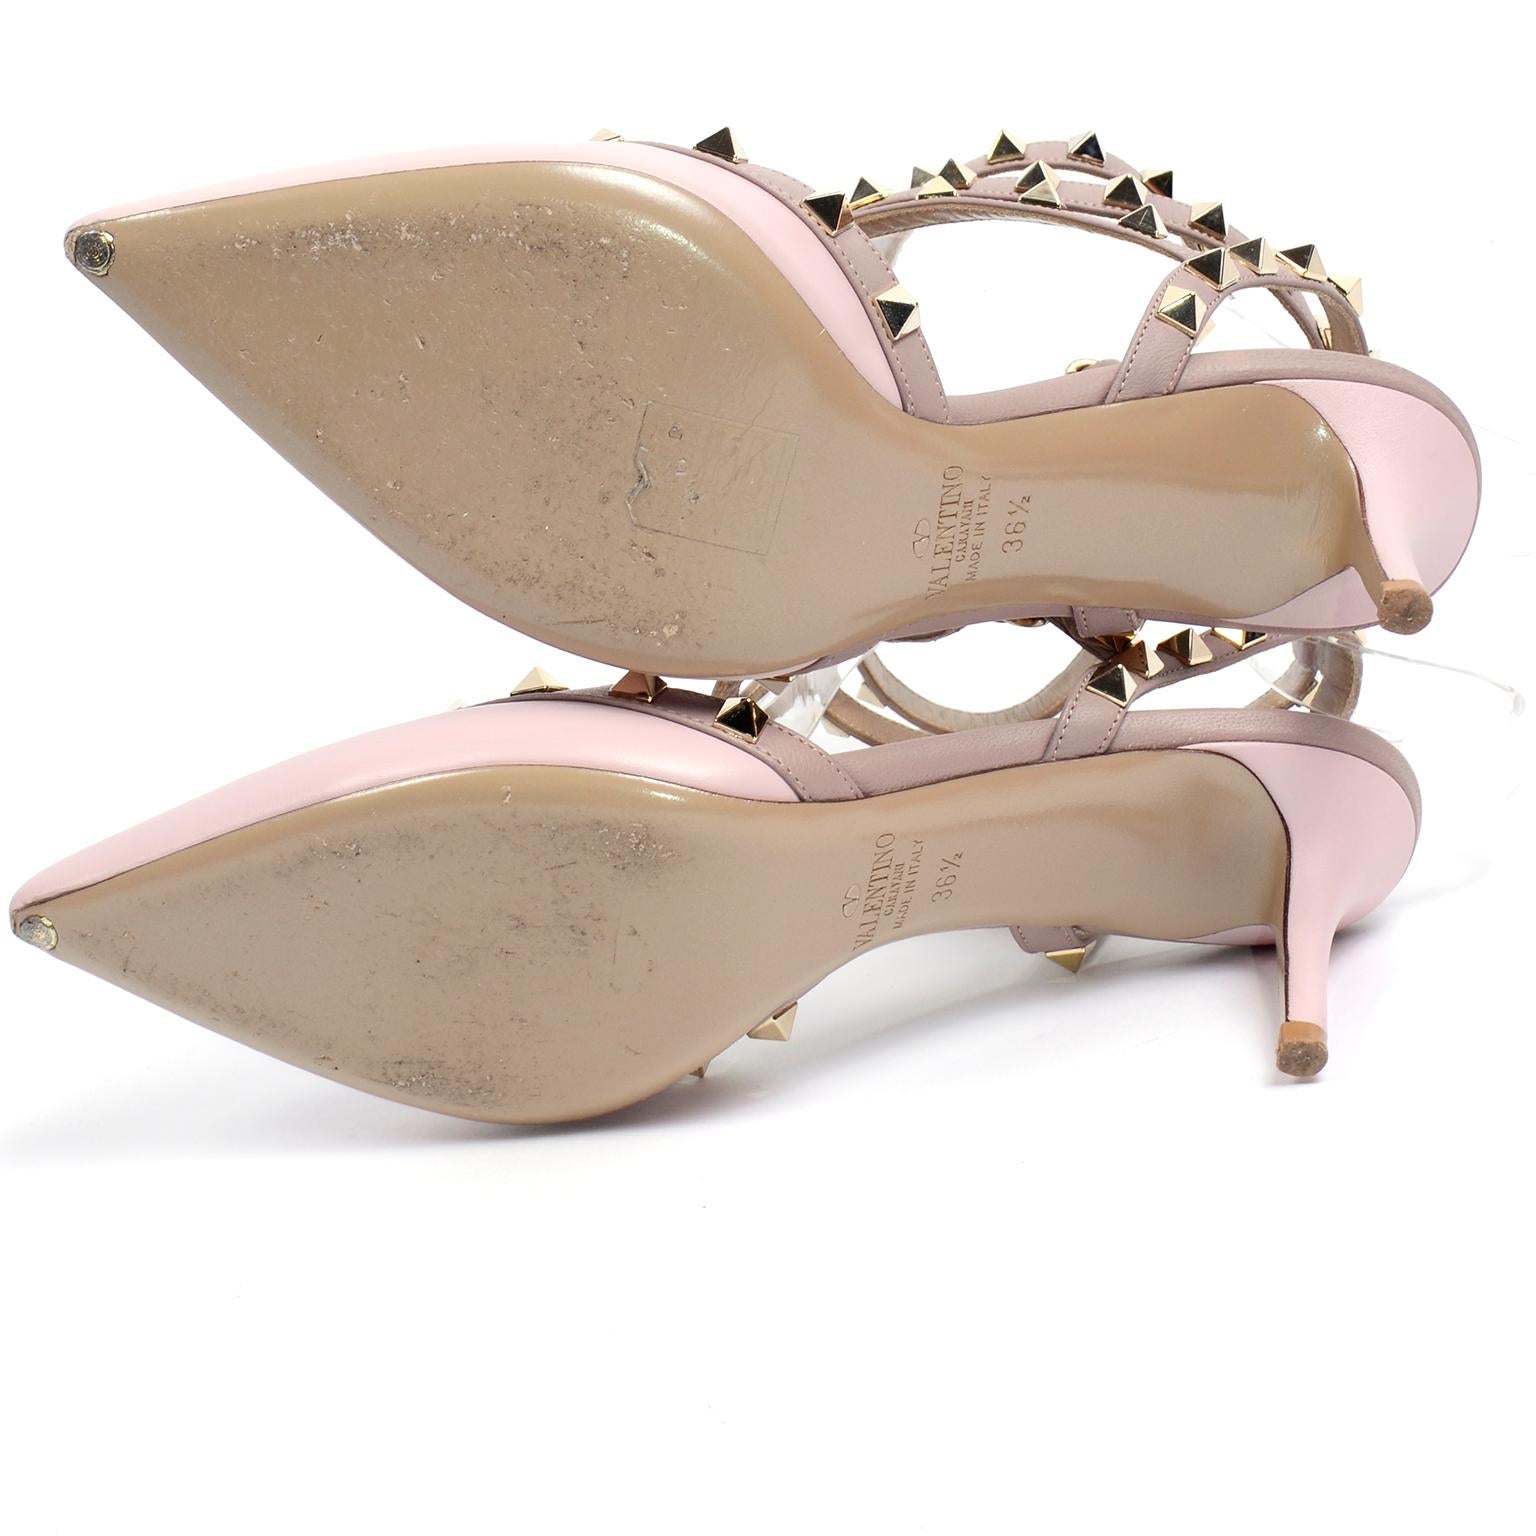 Valentino Rockstud Cage Ankle Strap Shoes W Heels in Water Rose Pink Size 6.5 2